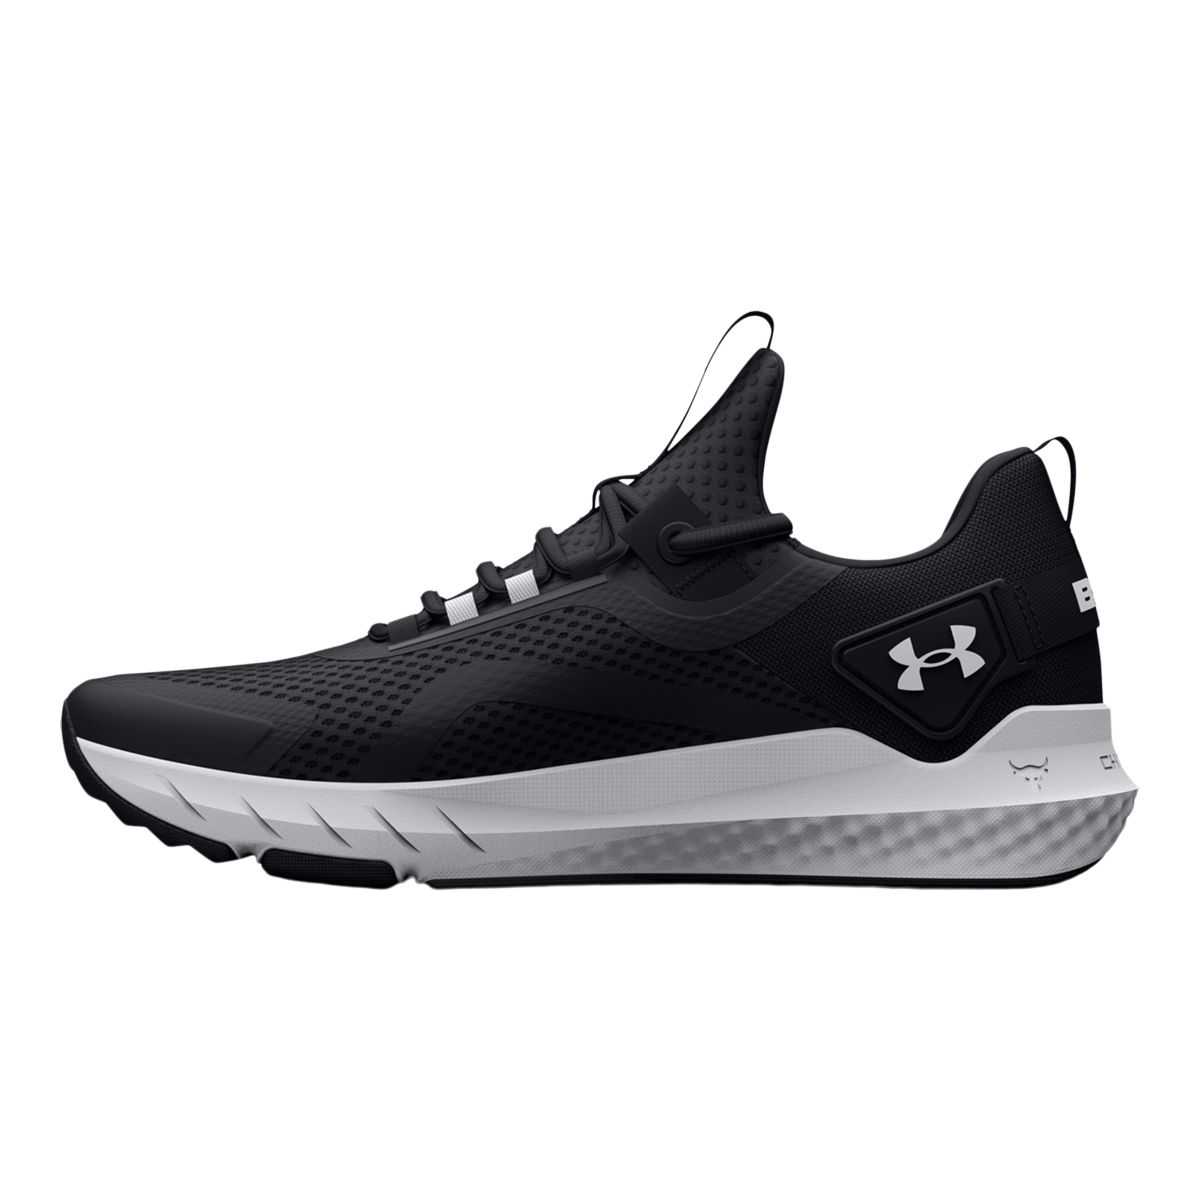 UNDER ARMOUR Women Project Rock BSR 3 Training Shoes